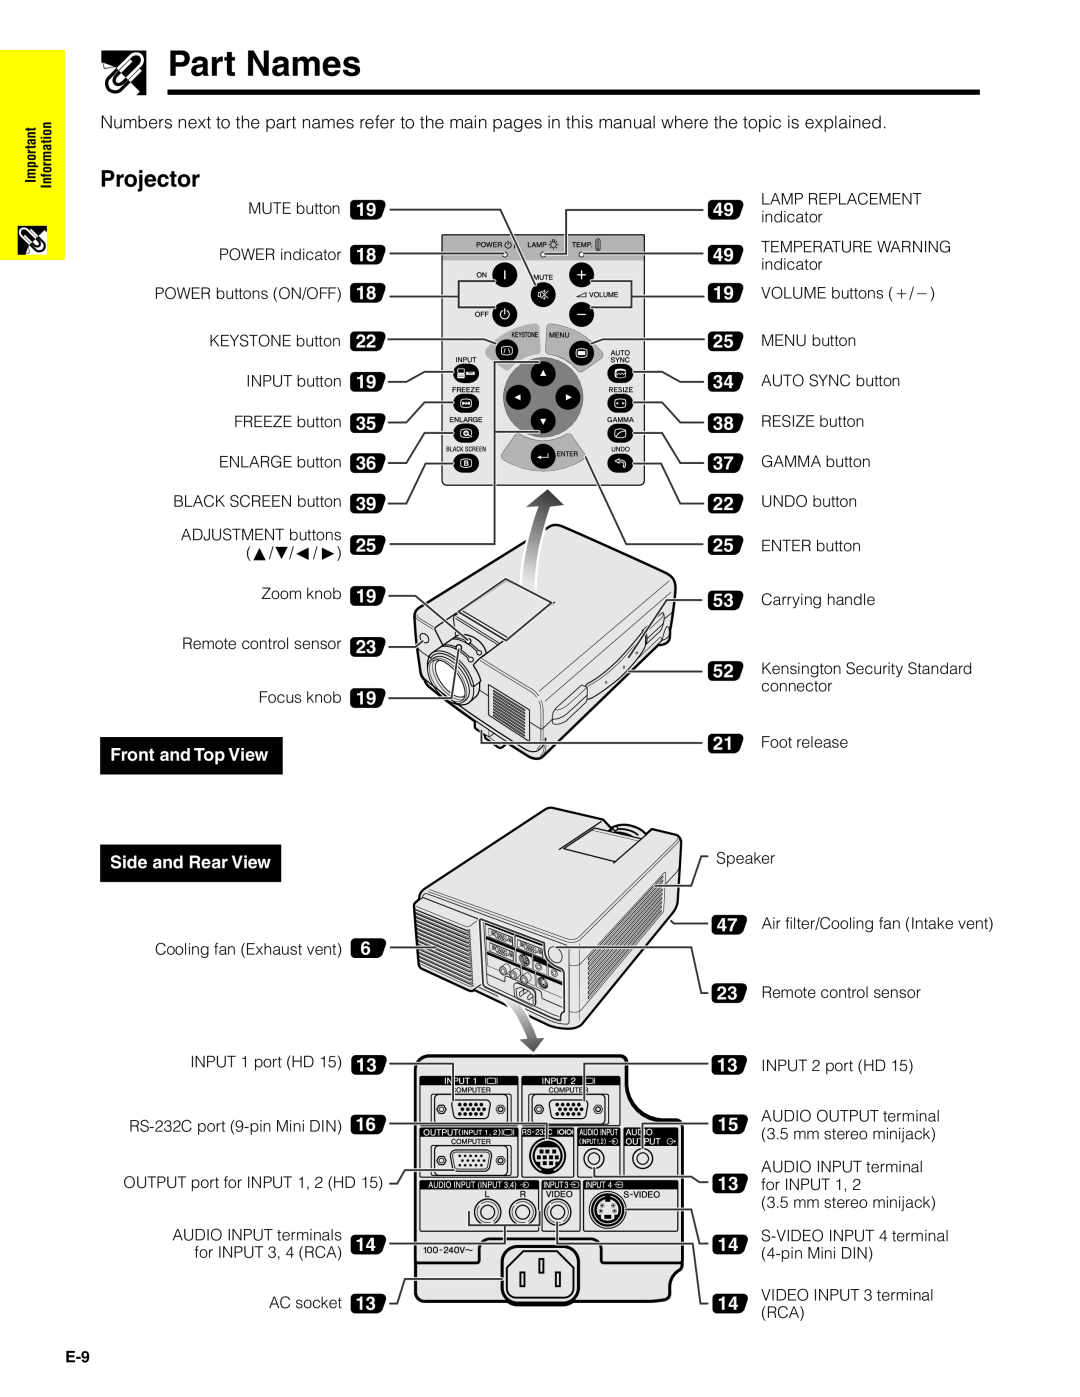 Sharp XG-C40XU operation manual Part Names, Projector, Side and Rear View, Front and Top View 